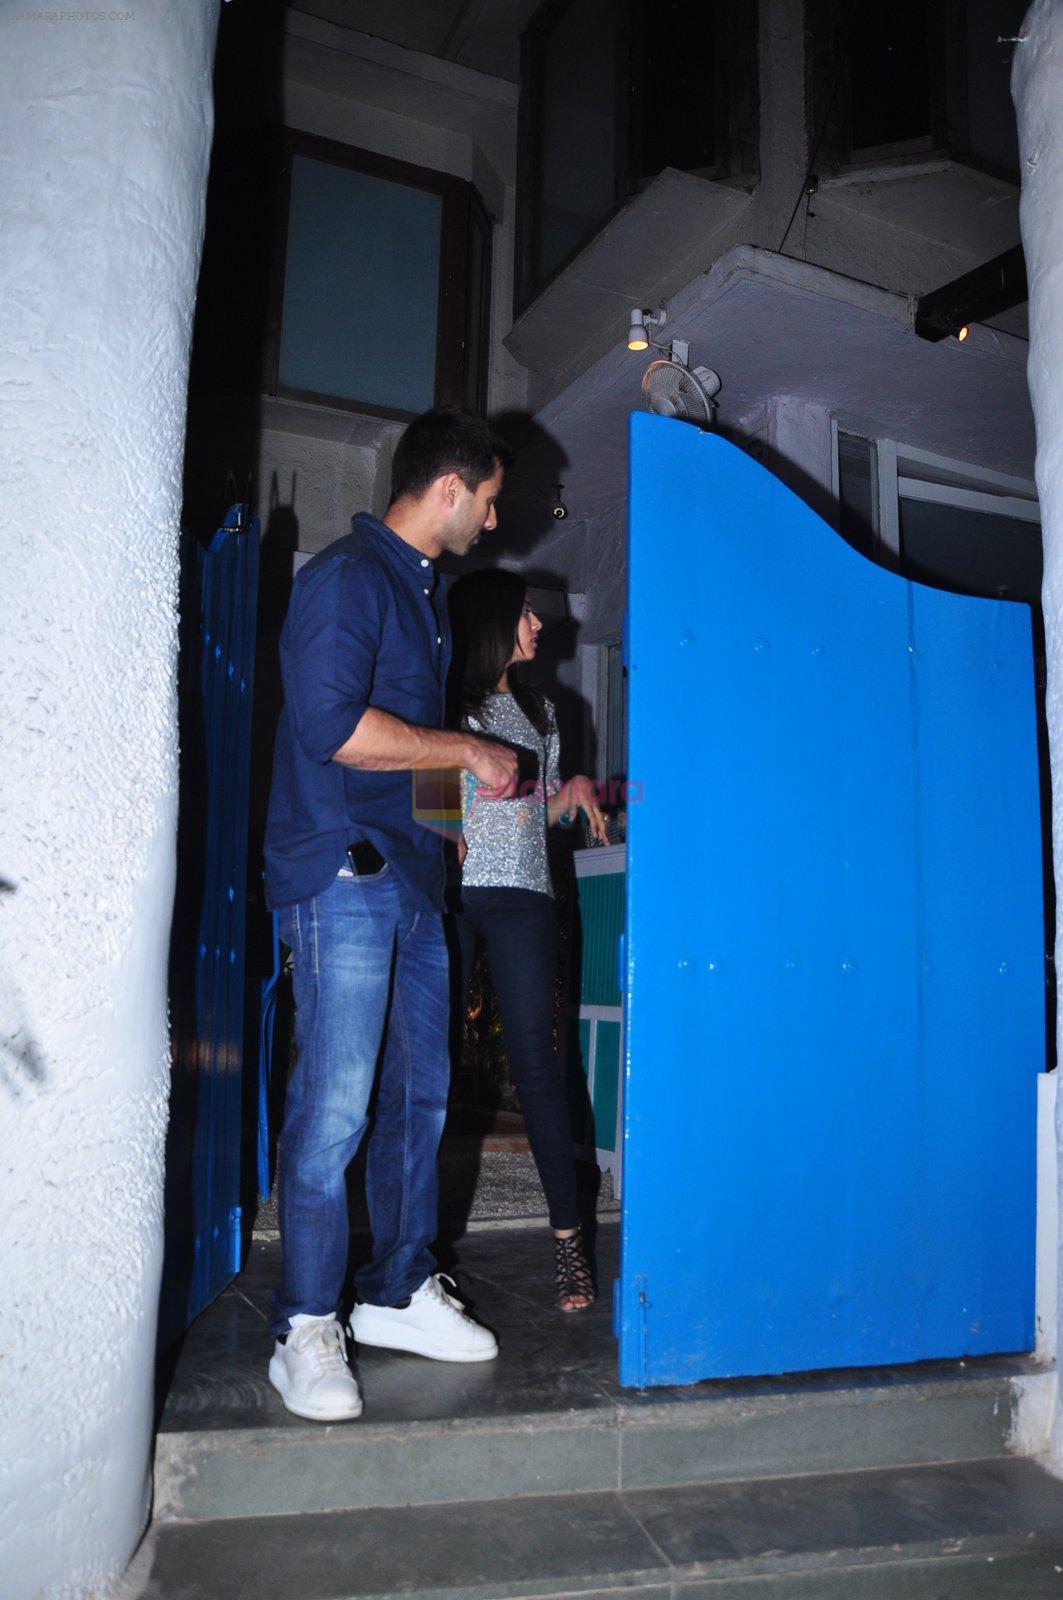 Shahid Kapoor and Mira Rajput on a dinner date at Olive on 31st Jan 2016